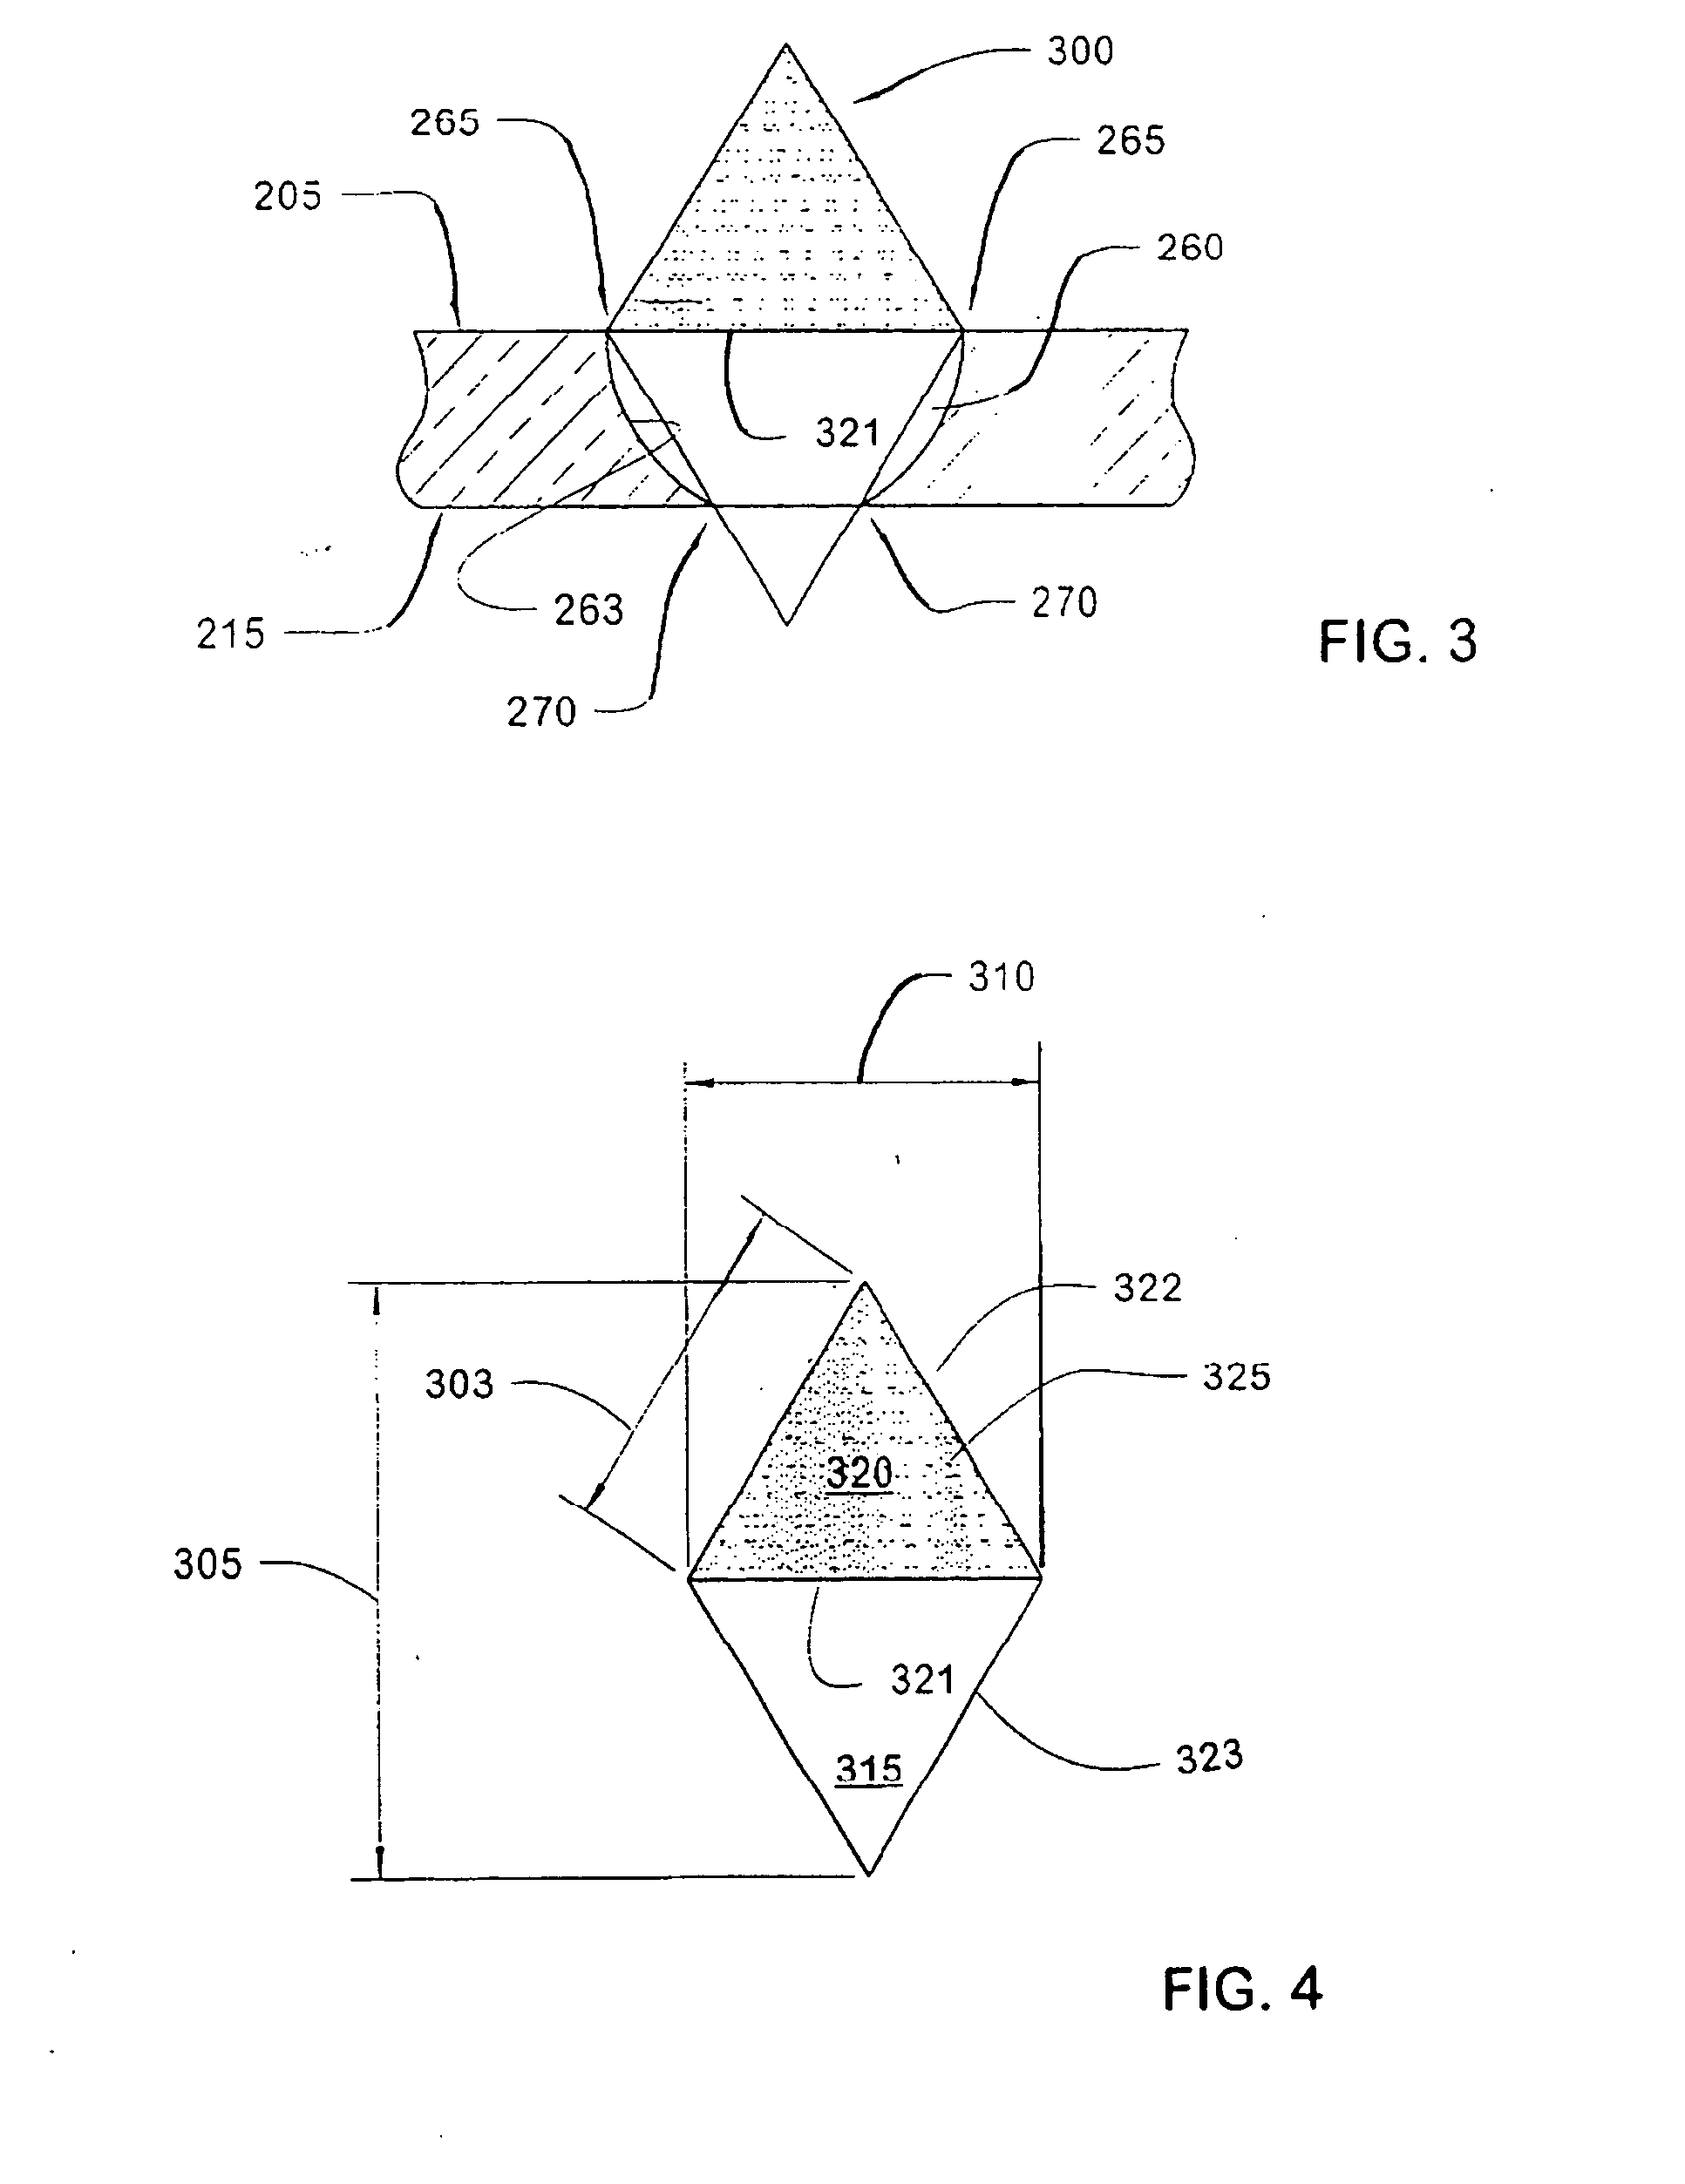 Apparatus for and method of forming concrete and transferring loads between concrete slabs